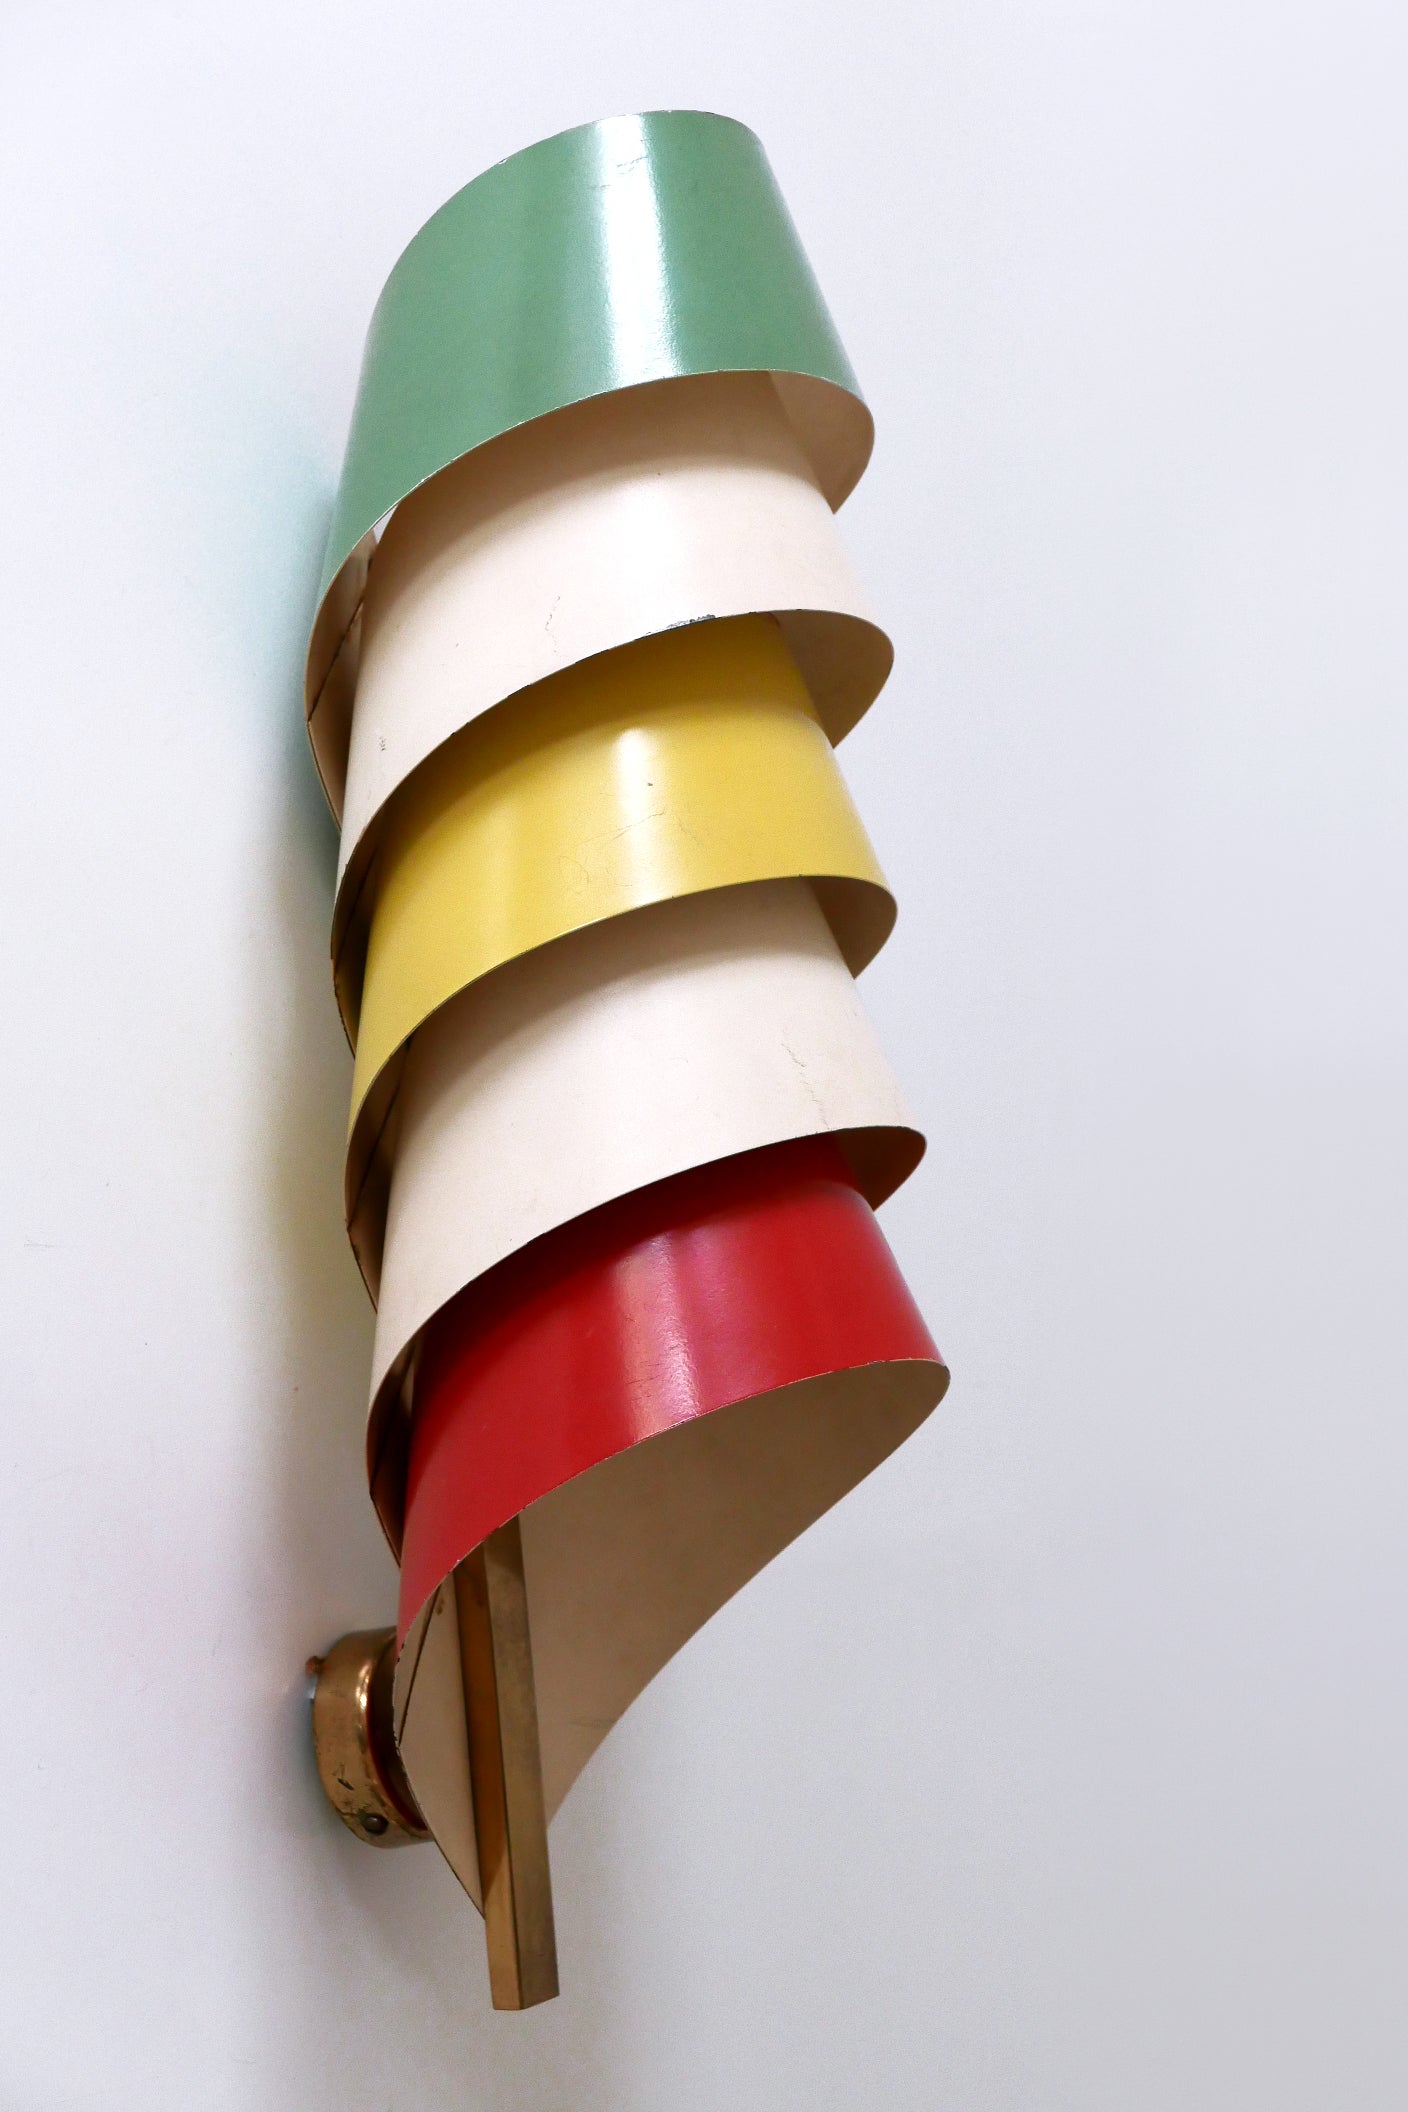 Extremely rare, elegant and highly decorative Mid-Century Modern sconce or wall fixture. Designed and manufactured probably in Scandinavia, 1950s.

Executed in brass and multi colored metal, the sconce comes with 1 x E27 / E26 Edison screw fit bulb